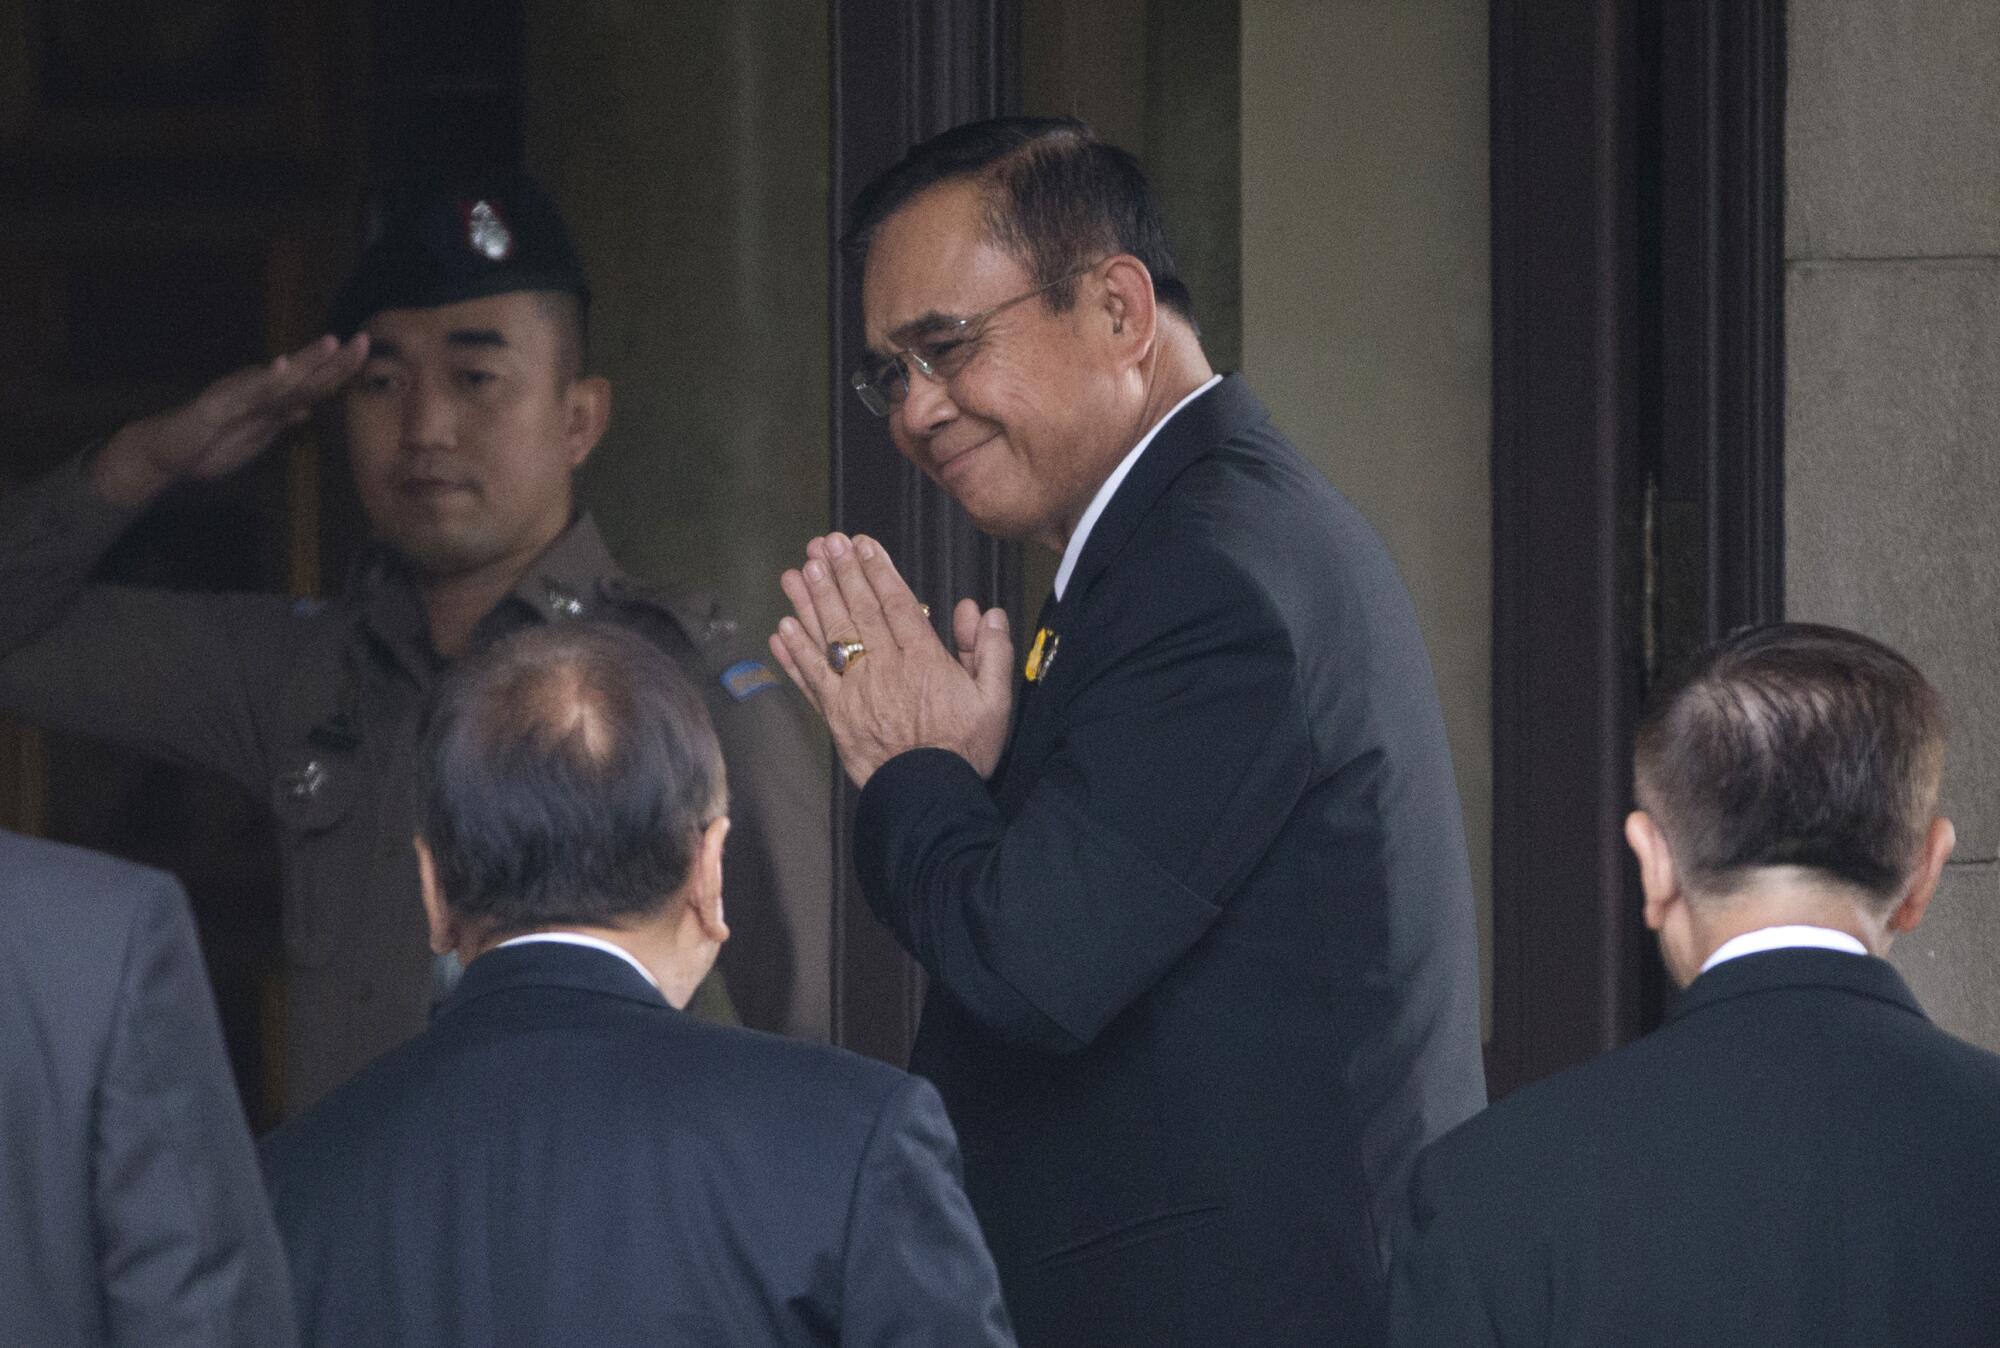 Thailand's Prime Minister Prayuth Chan-ocha arrives at a building guarded by a man in uniform 